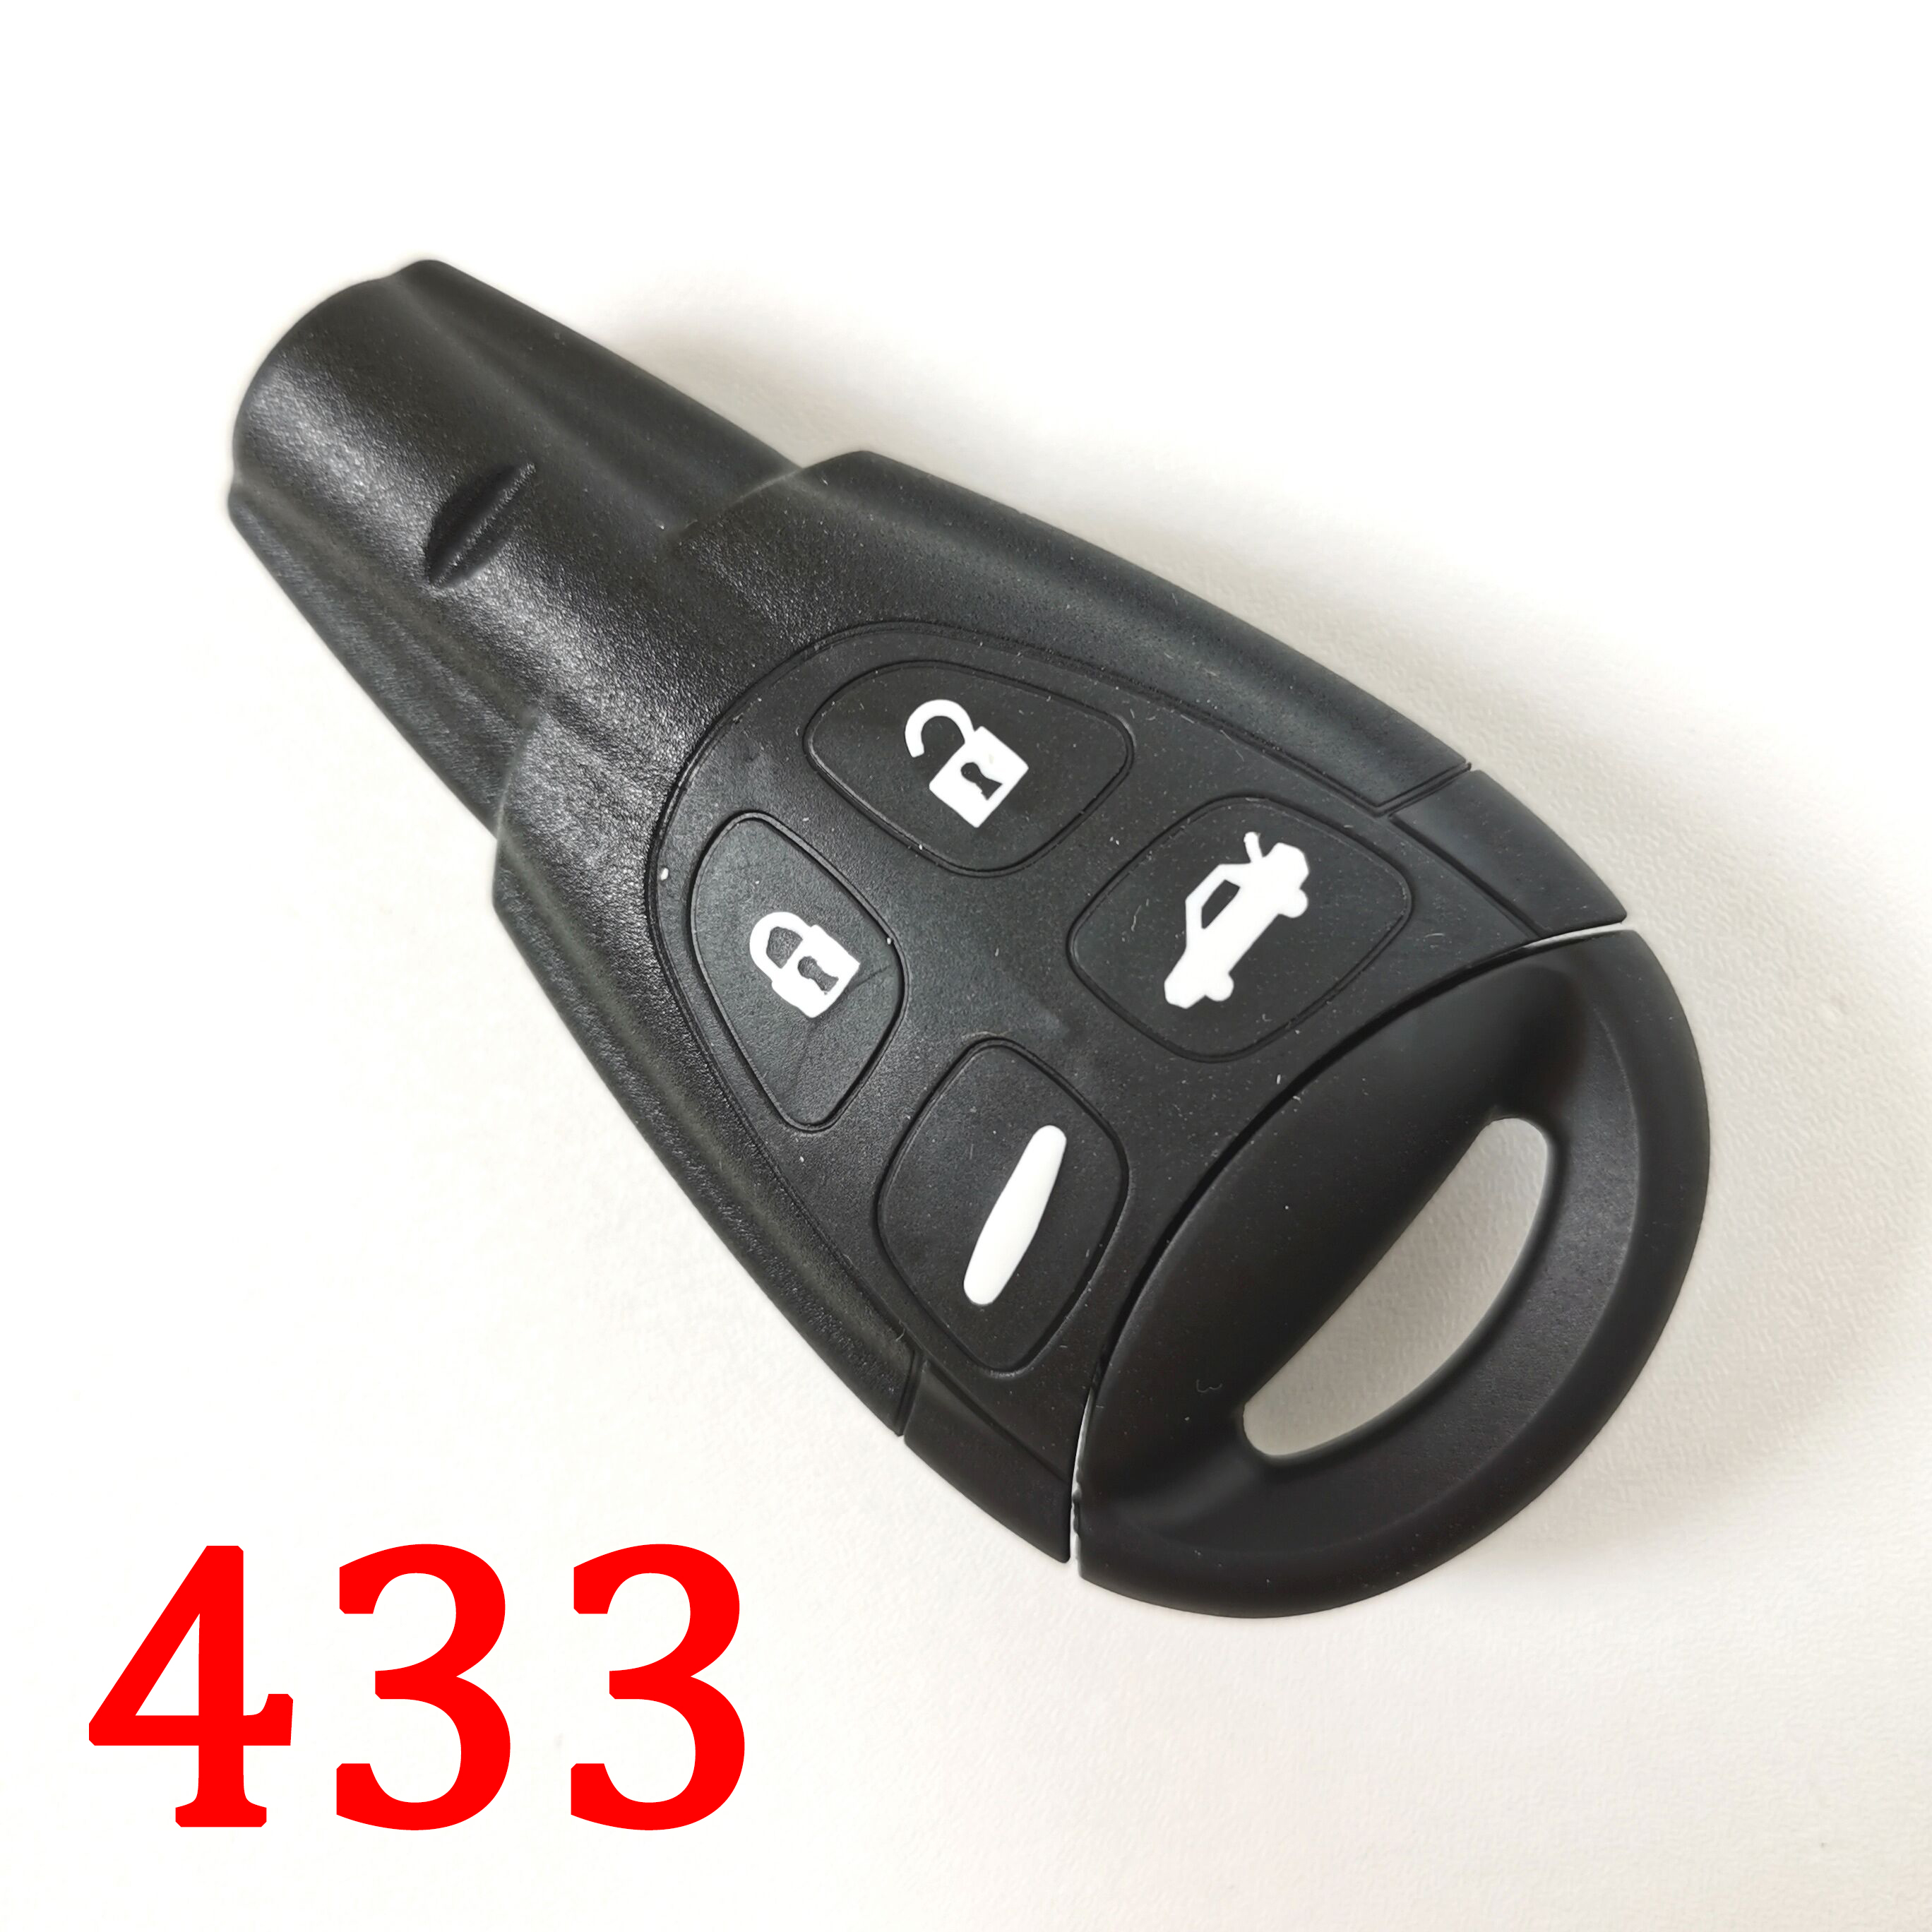 Remote Control Key for SAAB 9-3 93 2003-2010 4 Button 433Mhz PCF7946AT FCCID:LTQSAAM433TX